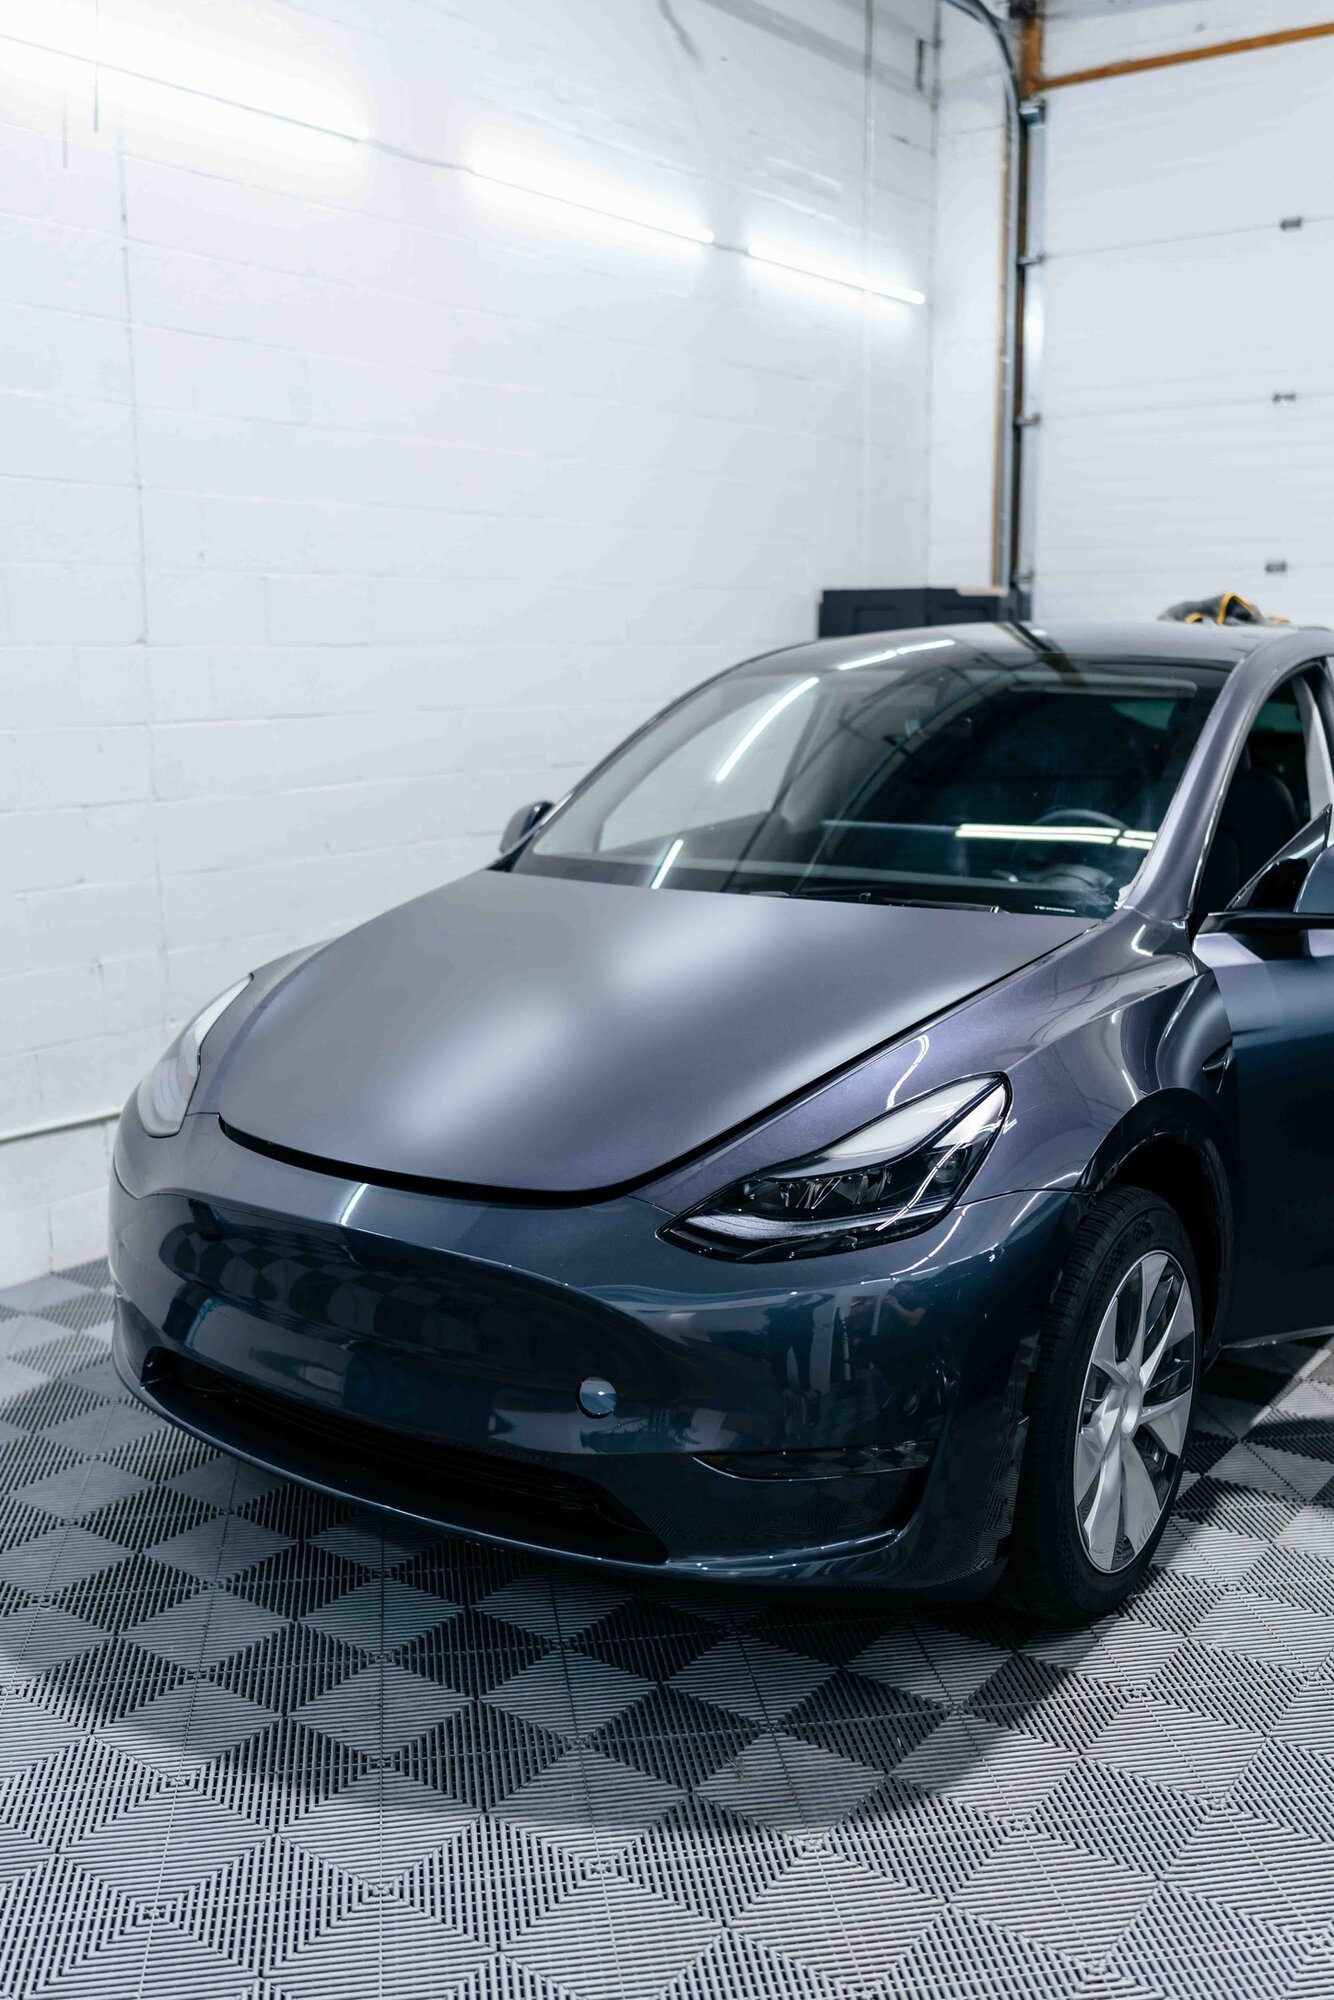 What Makes ClearBra the Best Choice for Paint Protection in Vancouver?￼ -  Tesla Vancouver Clear Bra